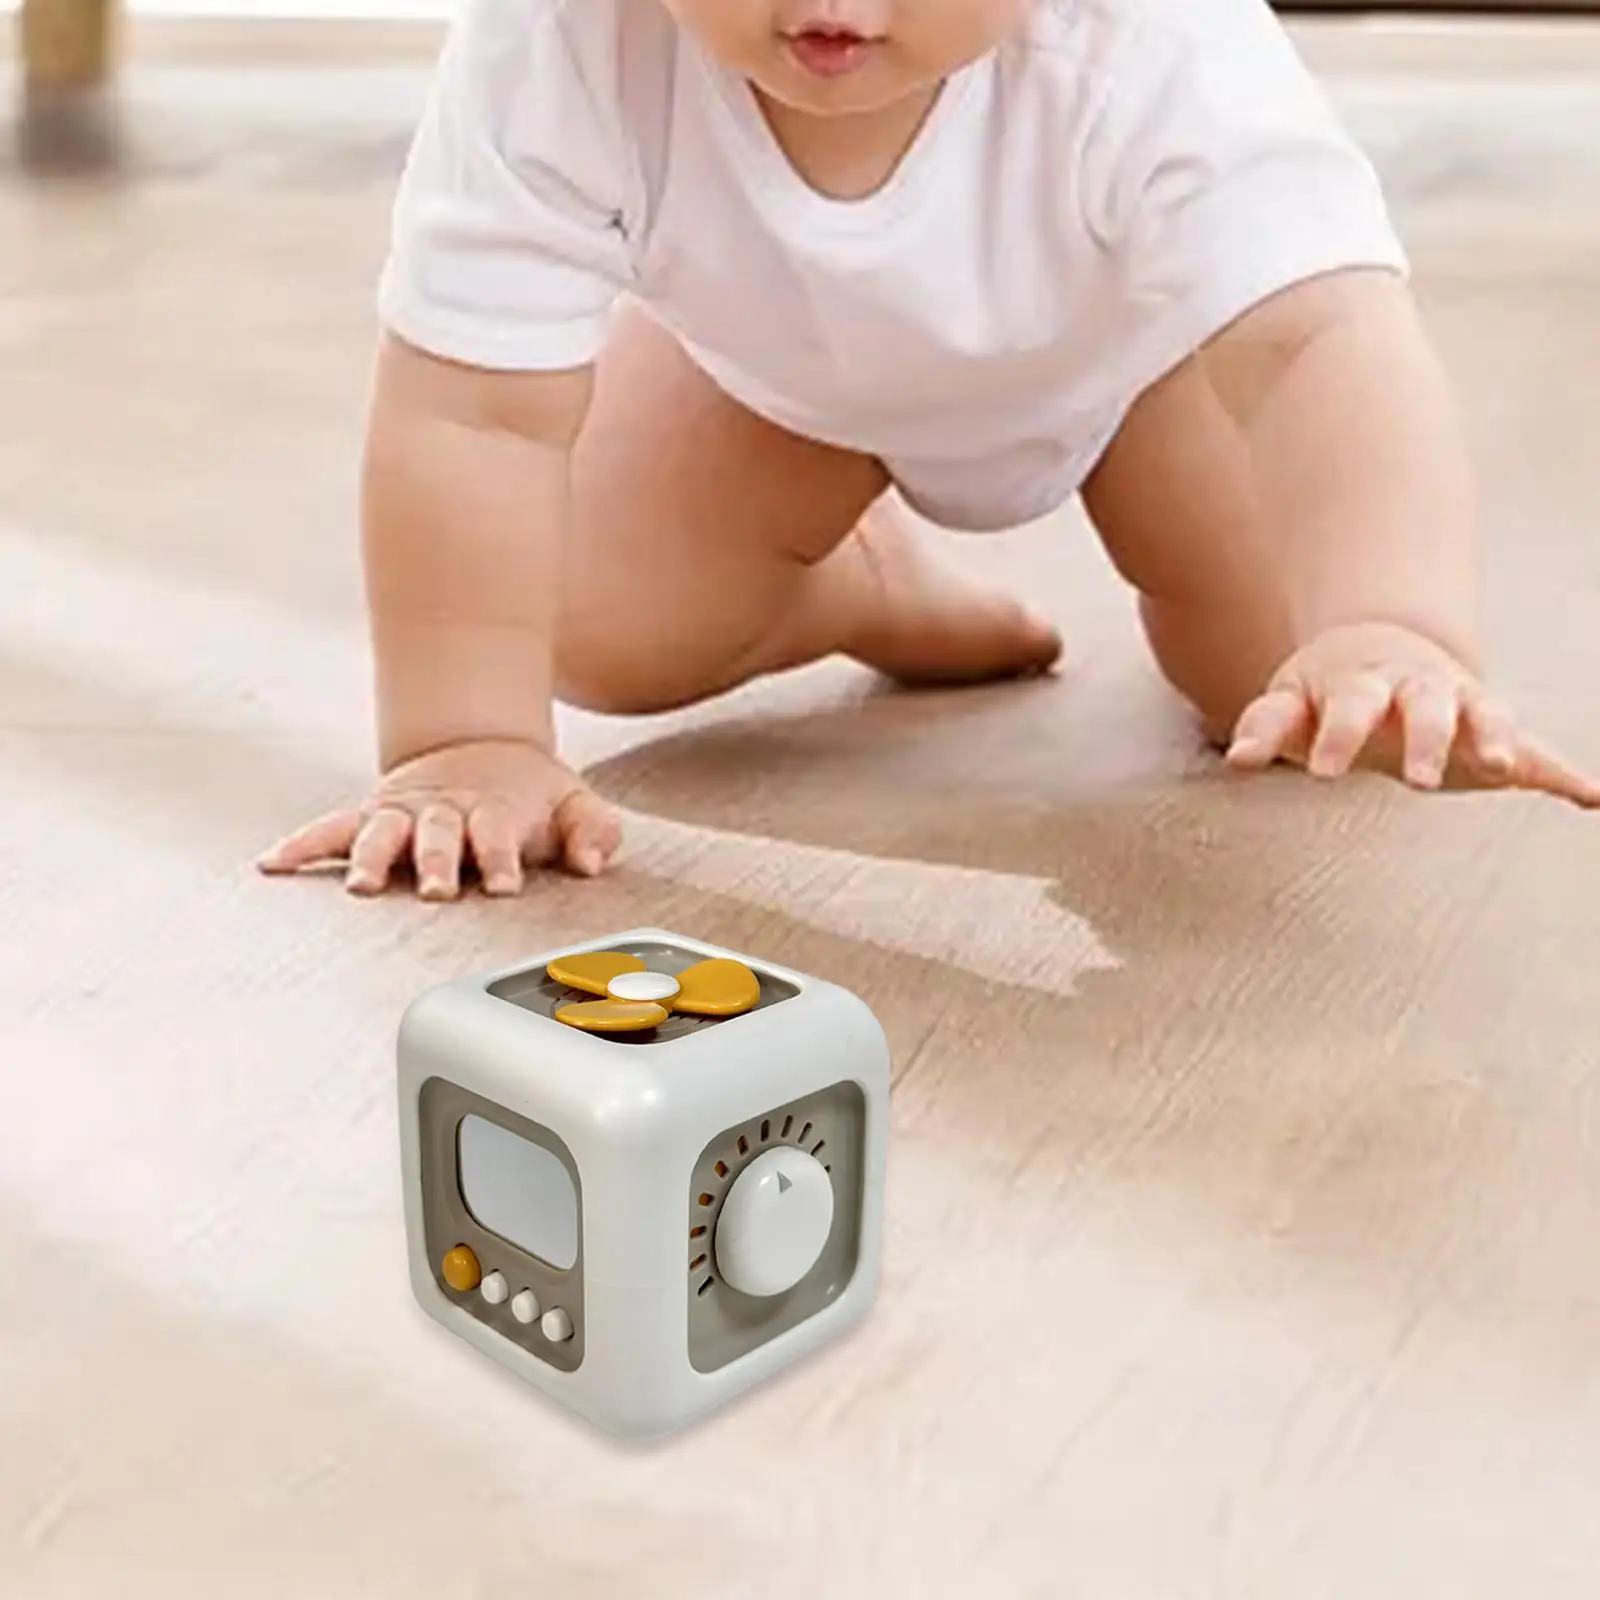 Cube Busy Ball Montessori Toy Early Developmental Sensory Learning Toy Activity Cube Dynamic